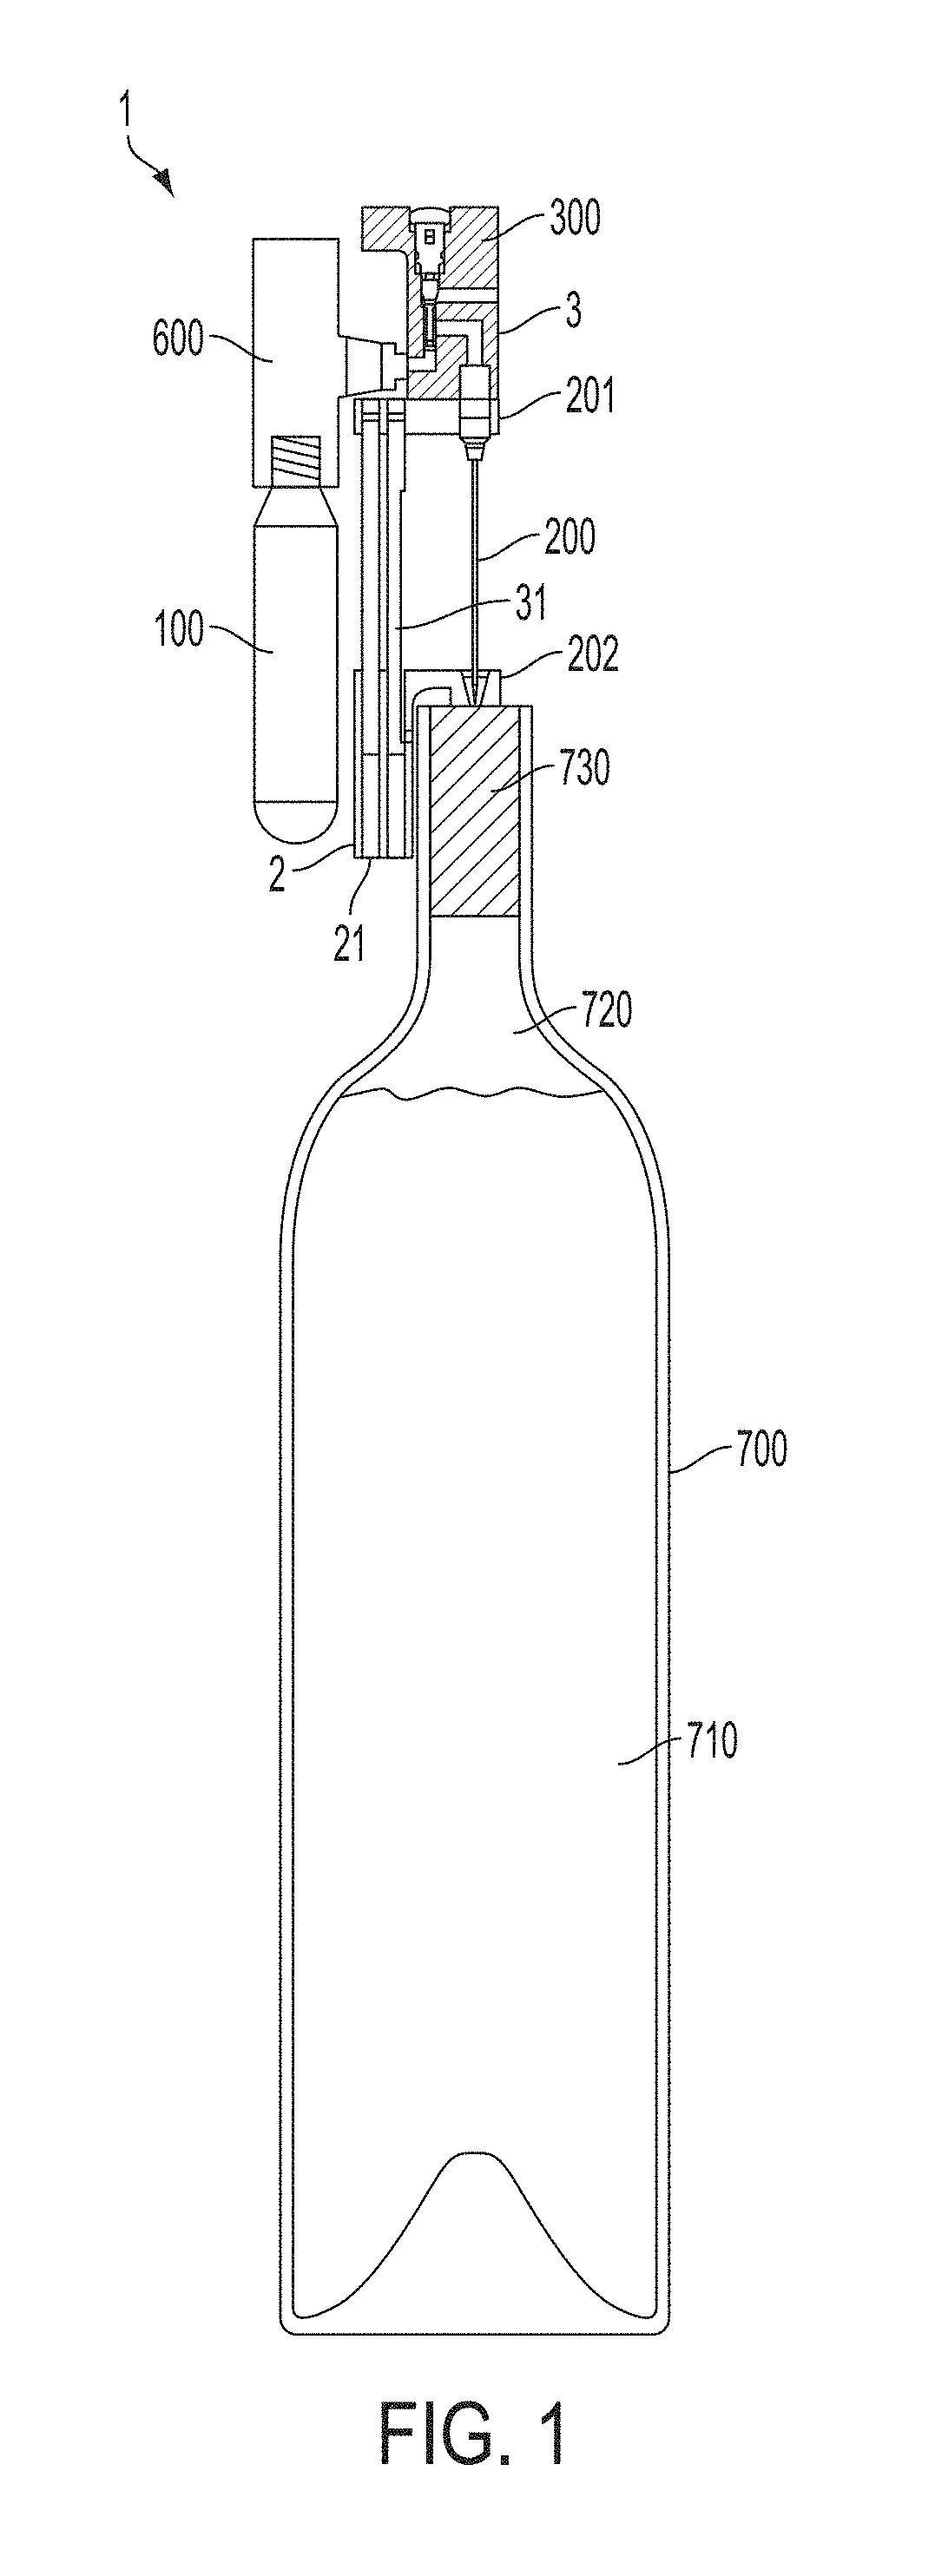 Needle for accessing a beverage in container